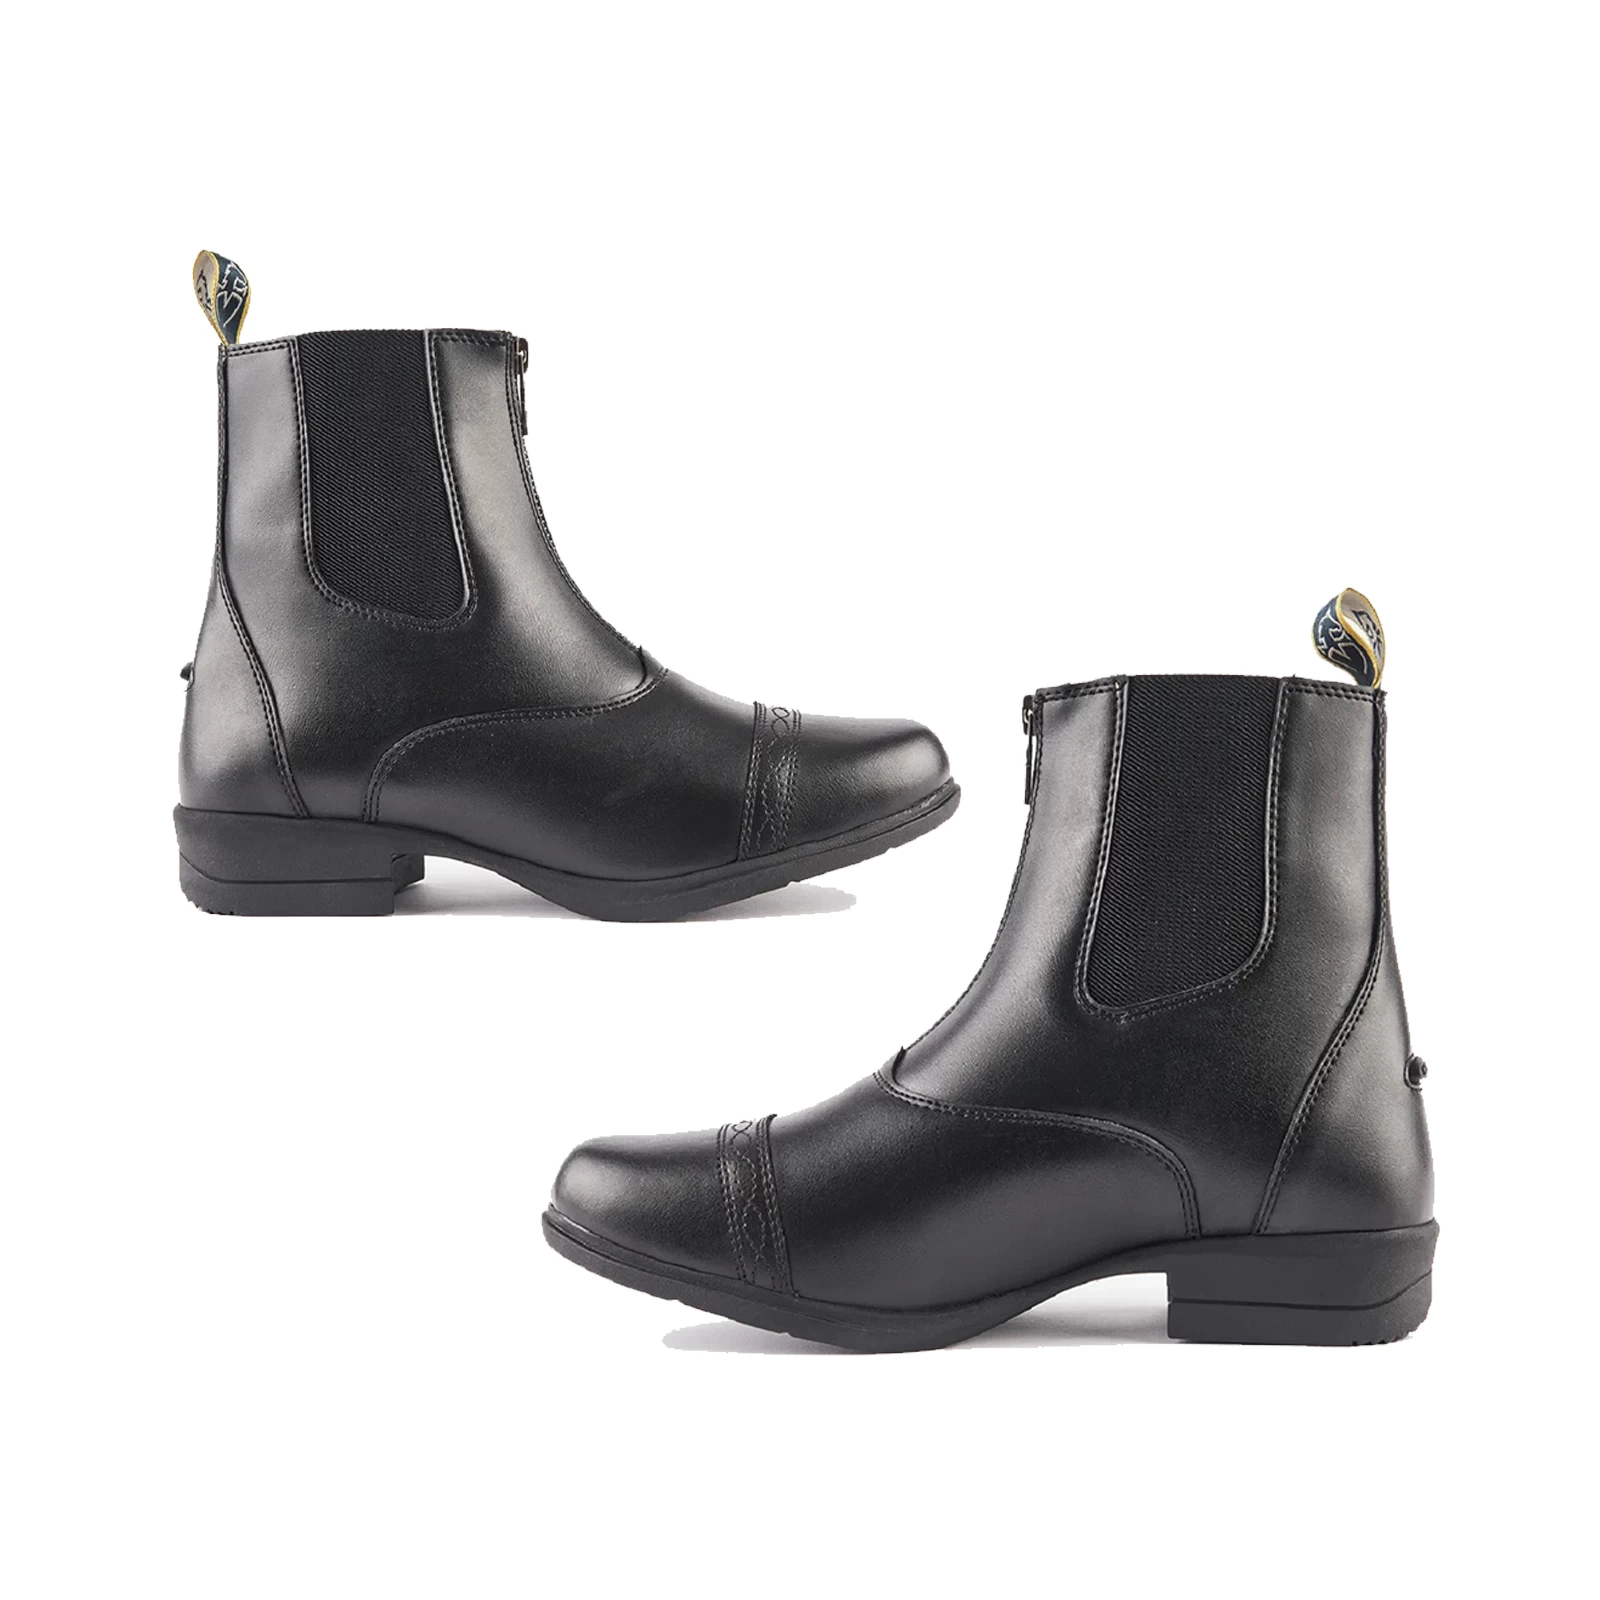 Shires Moretta Clio Paddock Boots Adult Black or Brown 9963